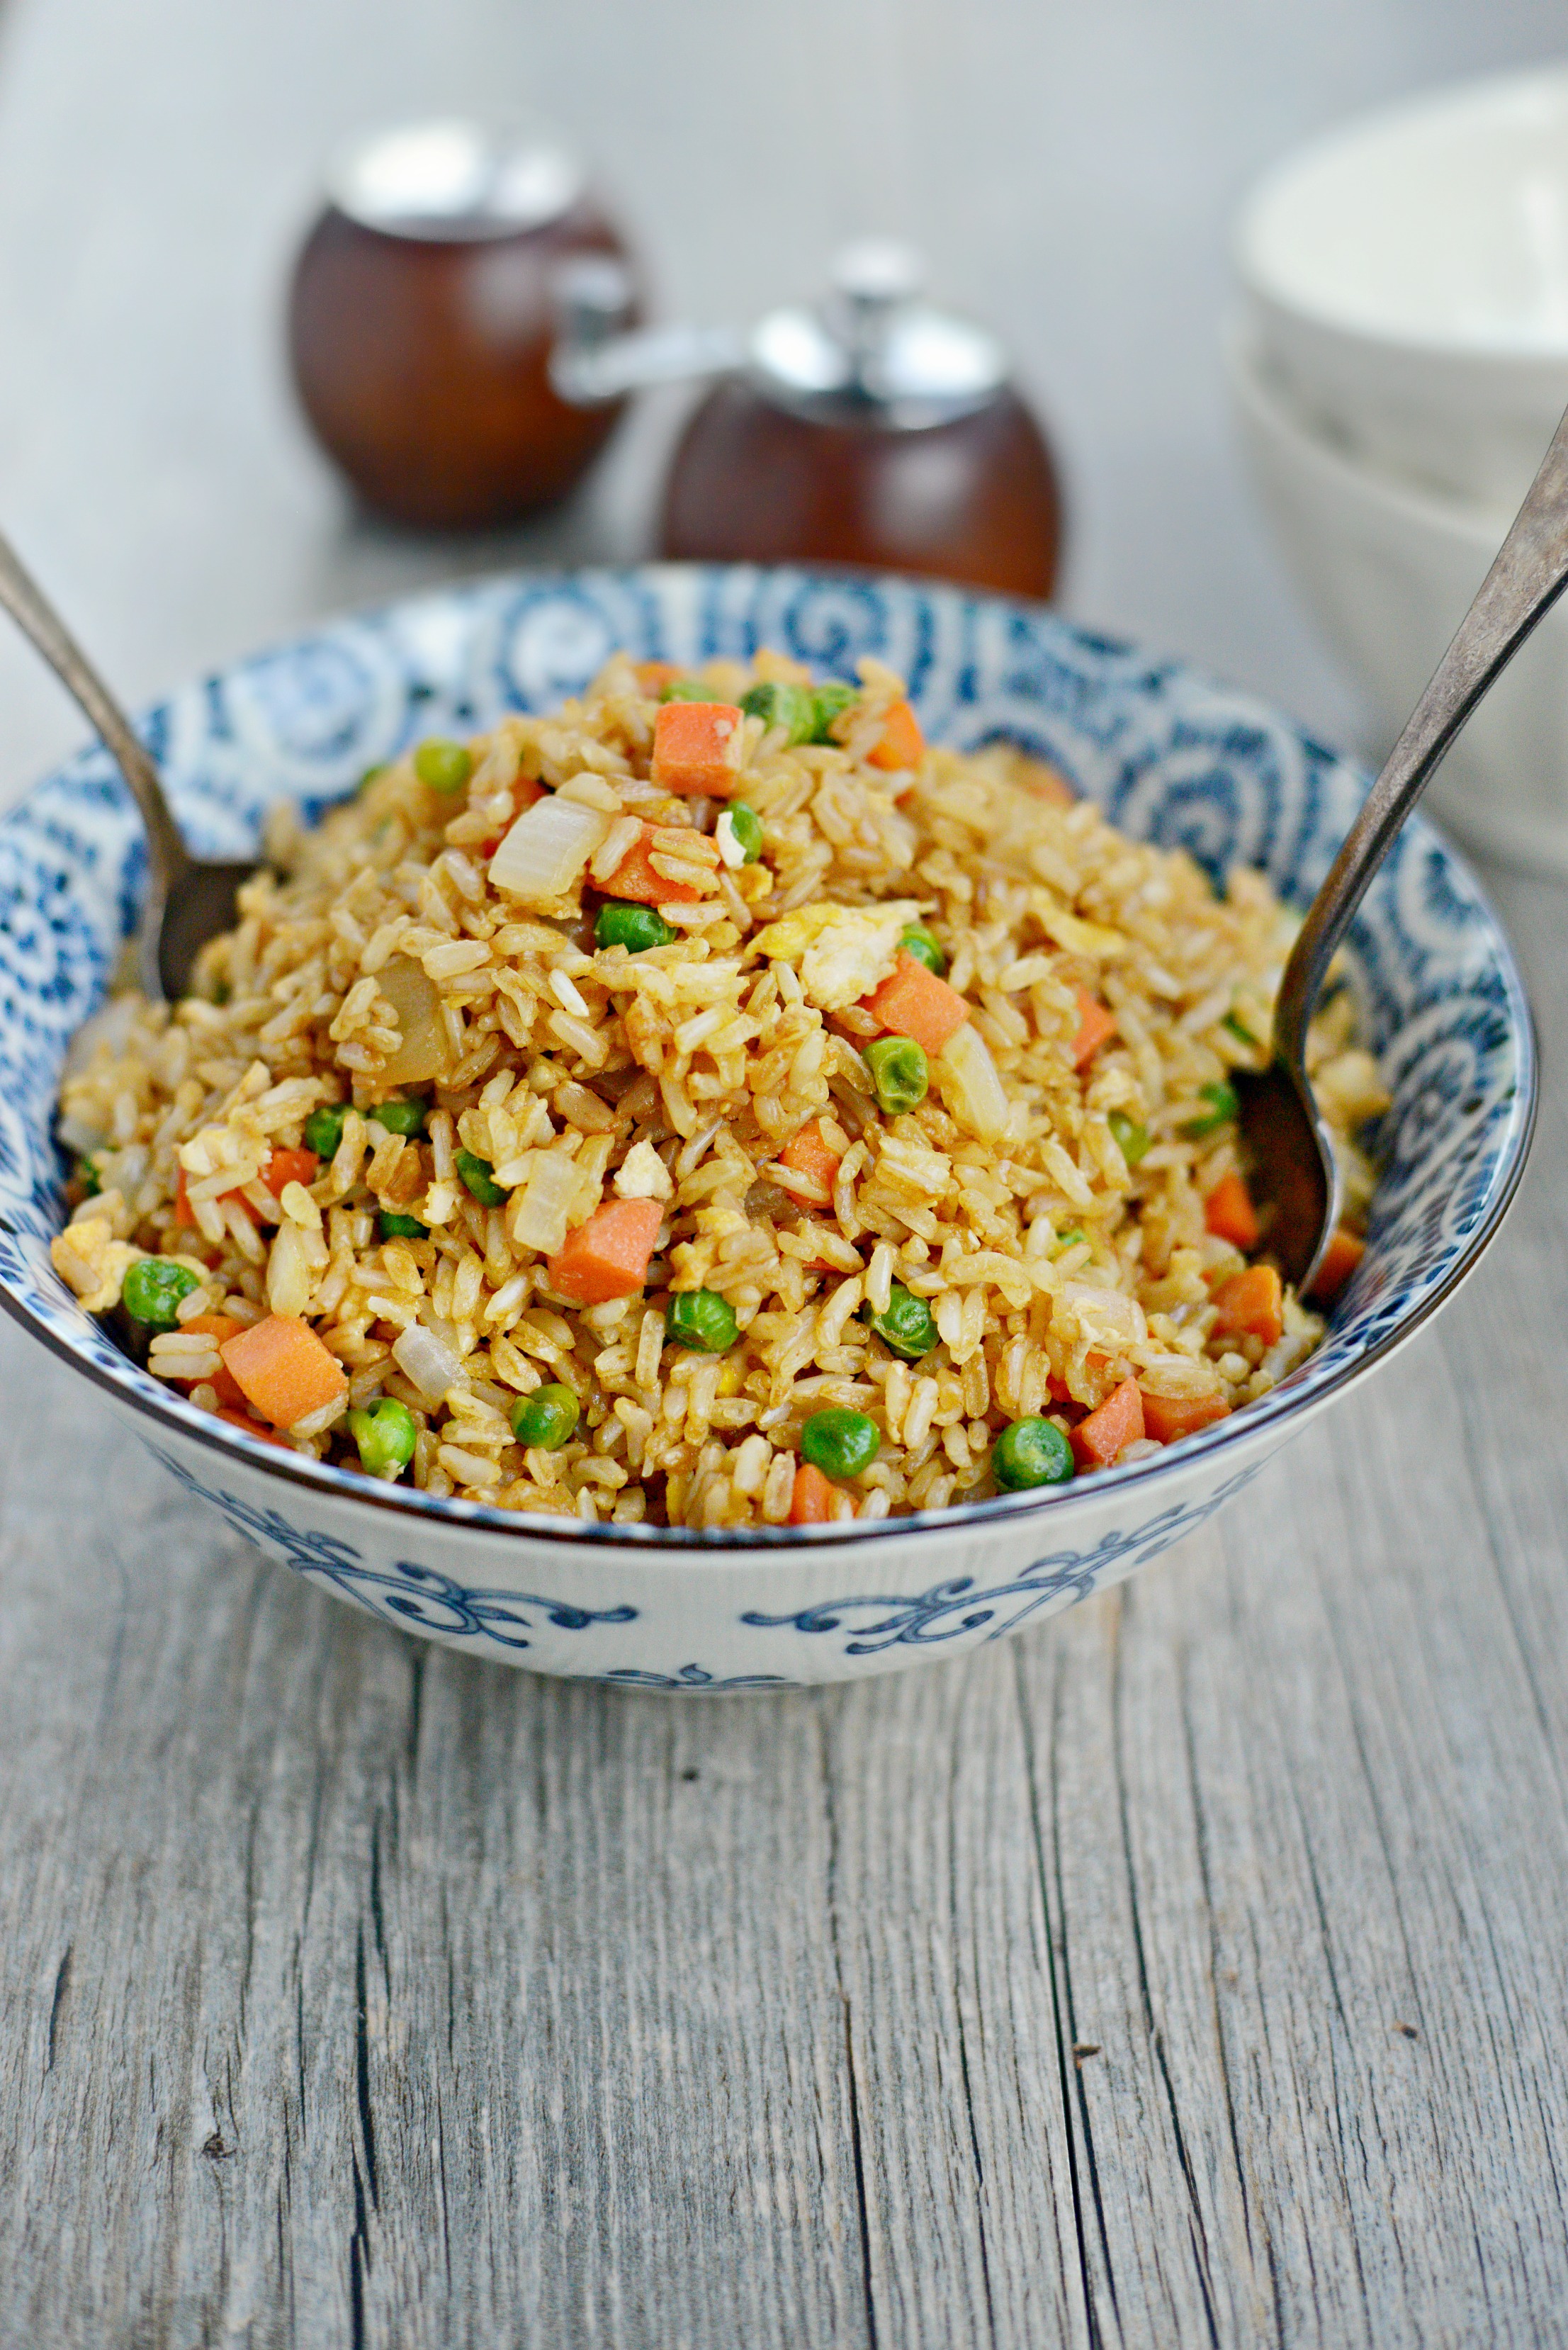 https://www.simplyscratch.com/wp-content/uploads/2016/09/Vegetable-Fried-Rice-with-Egg-l-SimplyScratch.com-11.jpg